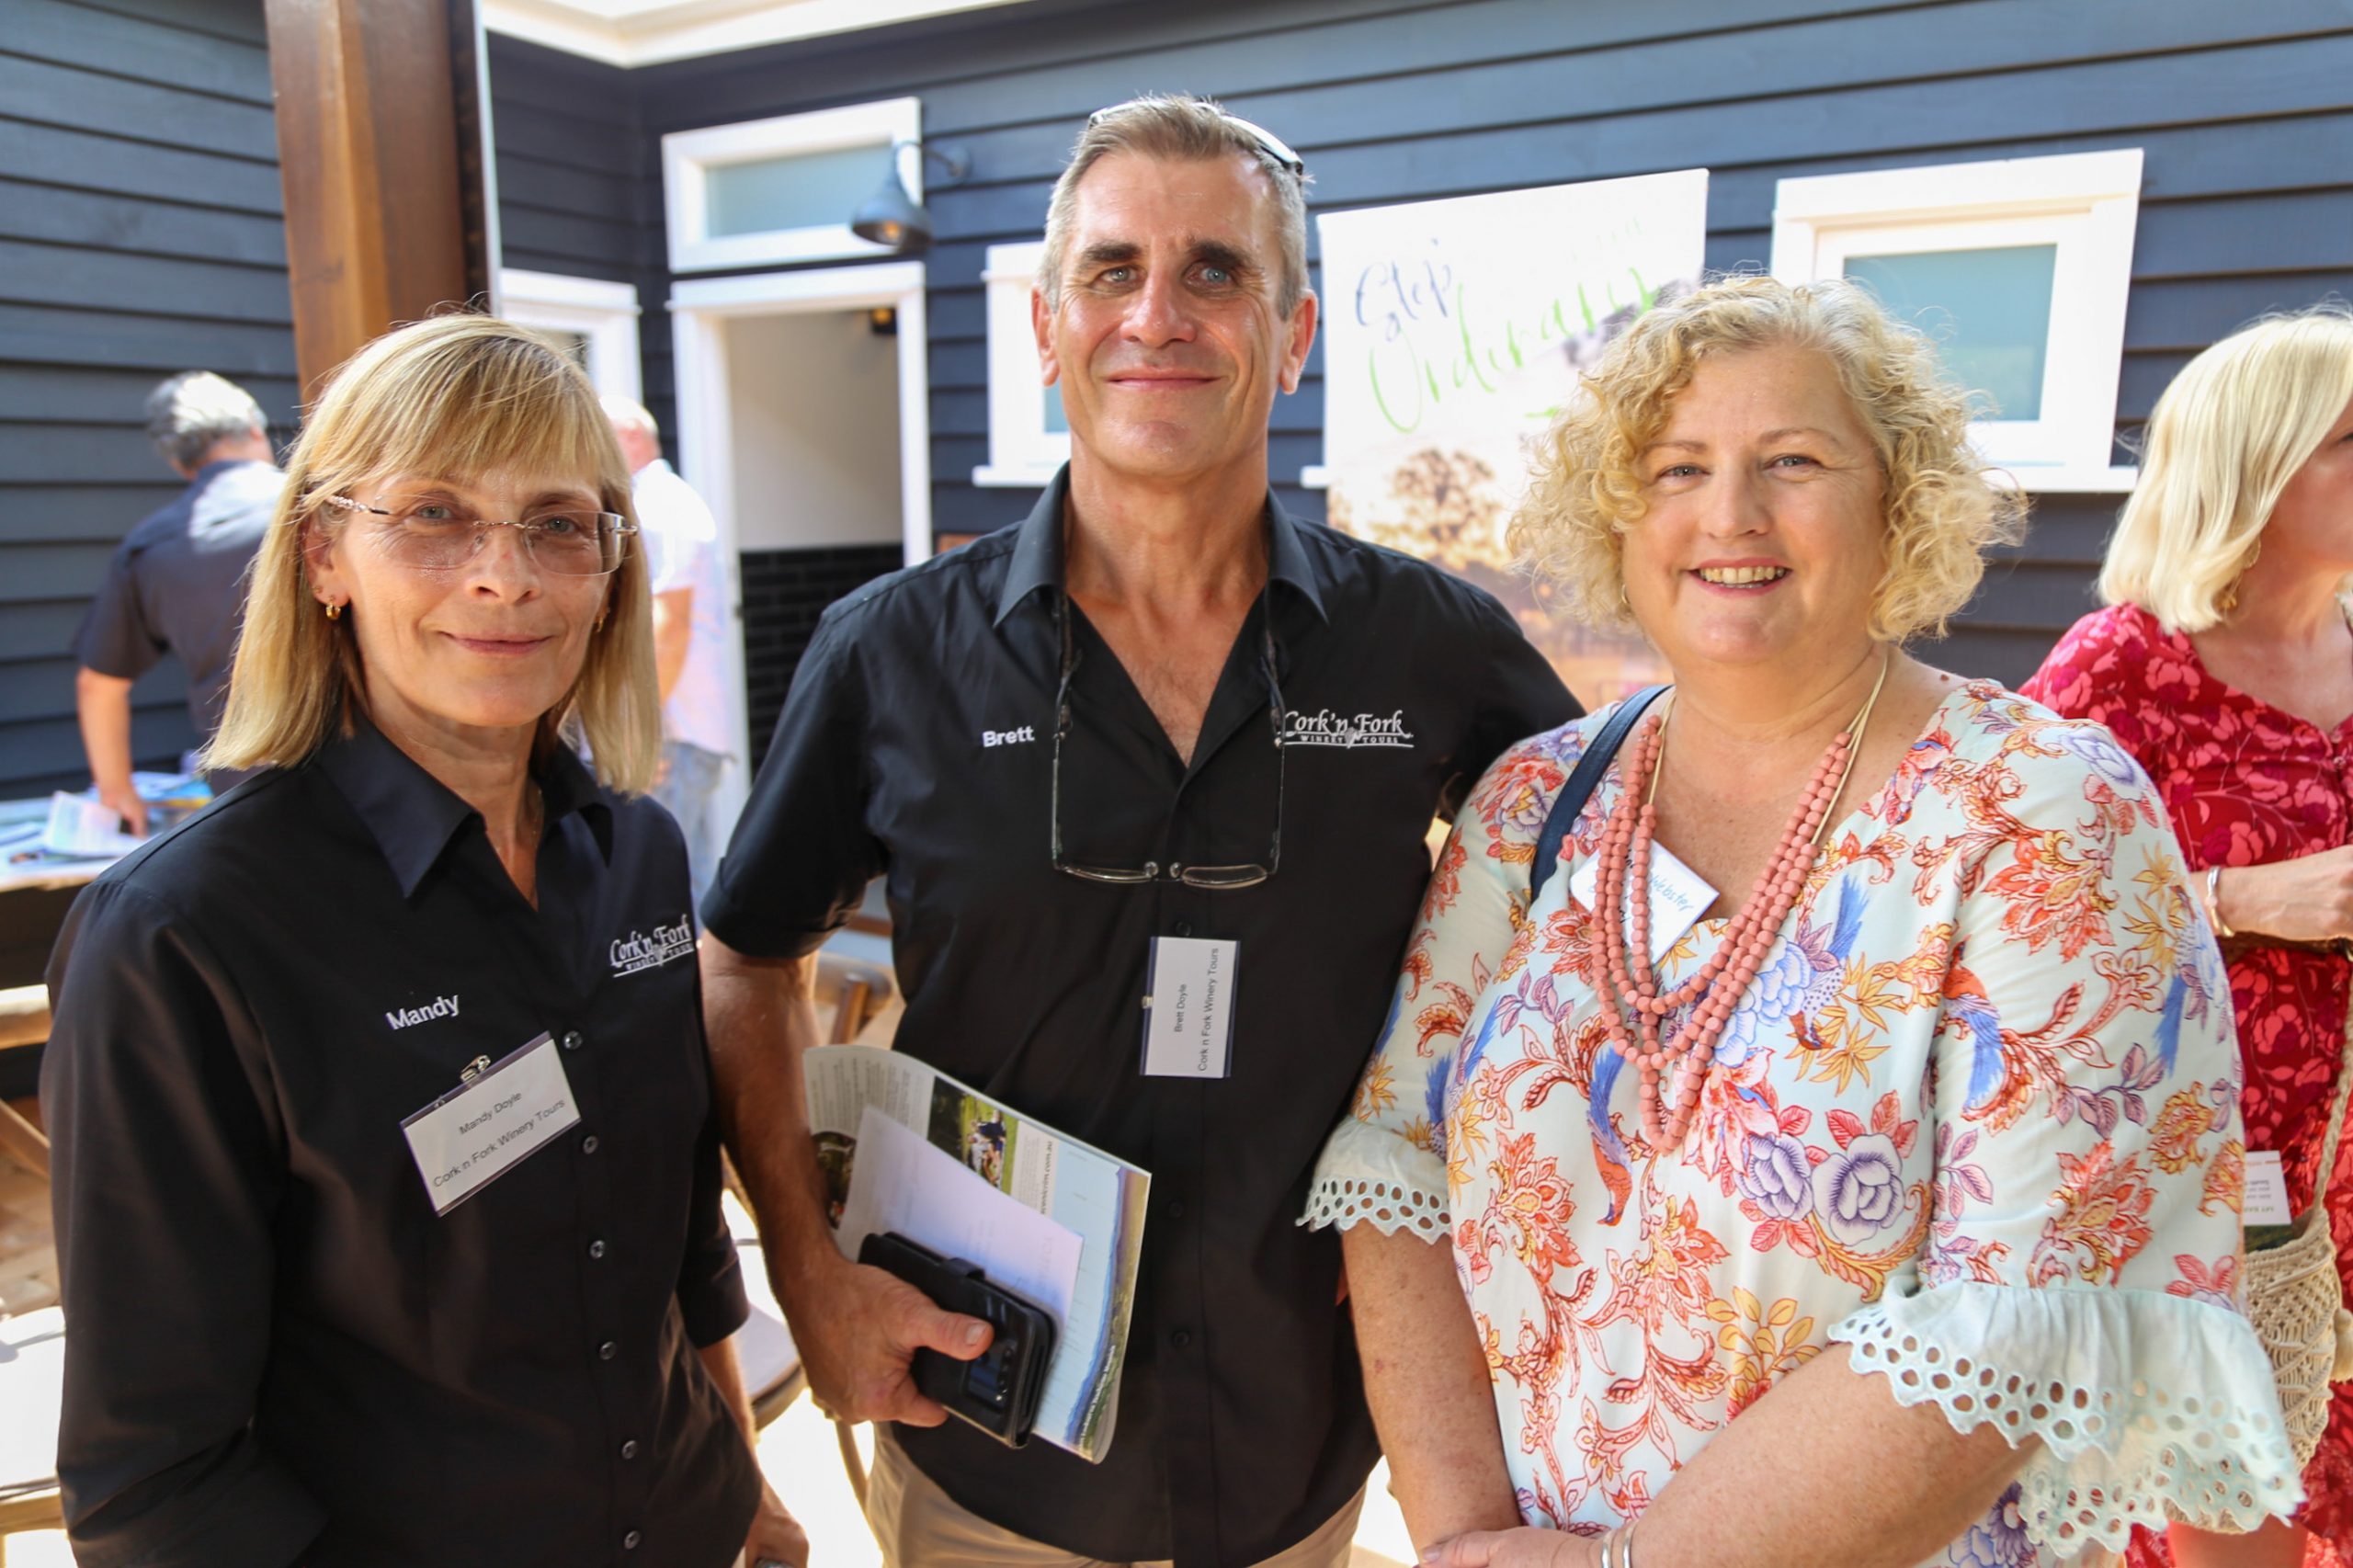 Mandy and Brett Doyle of Cork N Fork and Wendy Webster of Scenic Rim Brewery. Tourism Showcase, Kalbar.